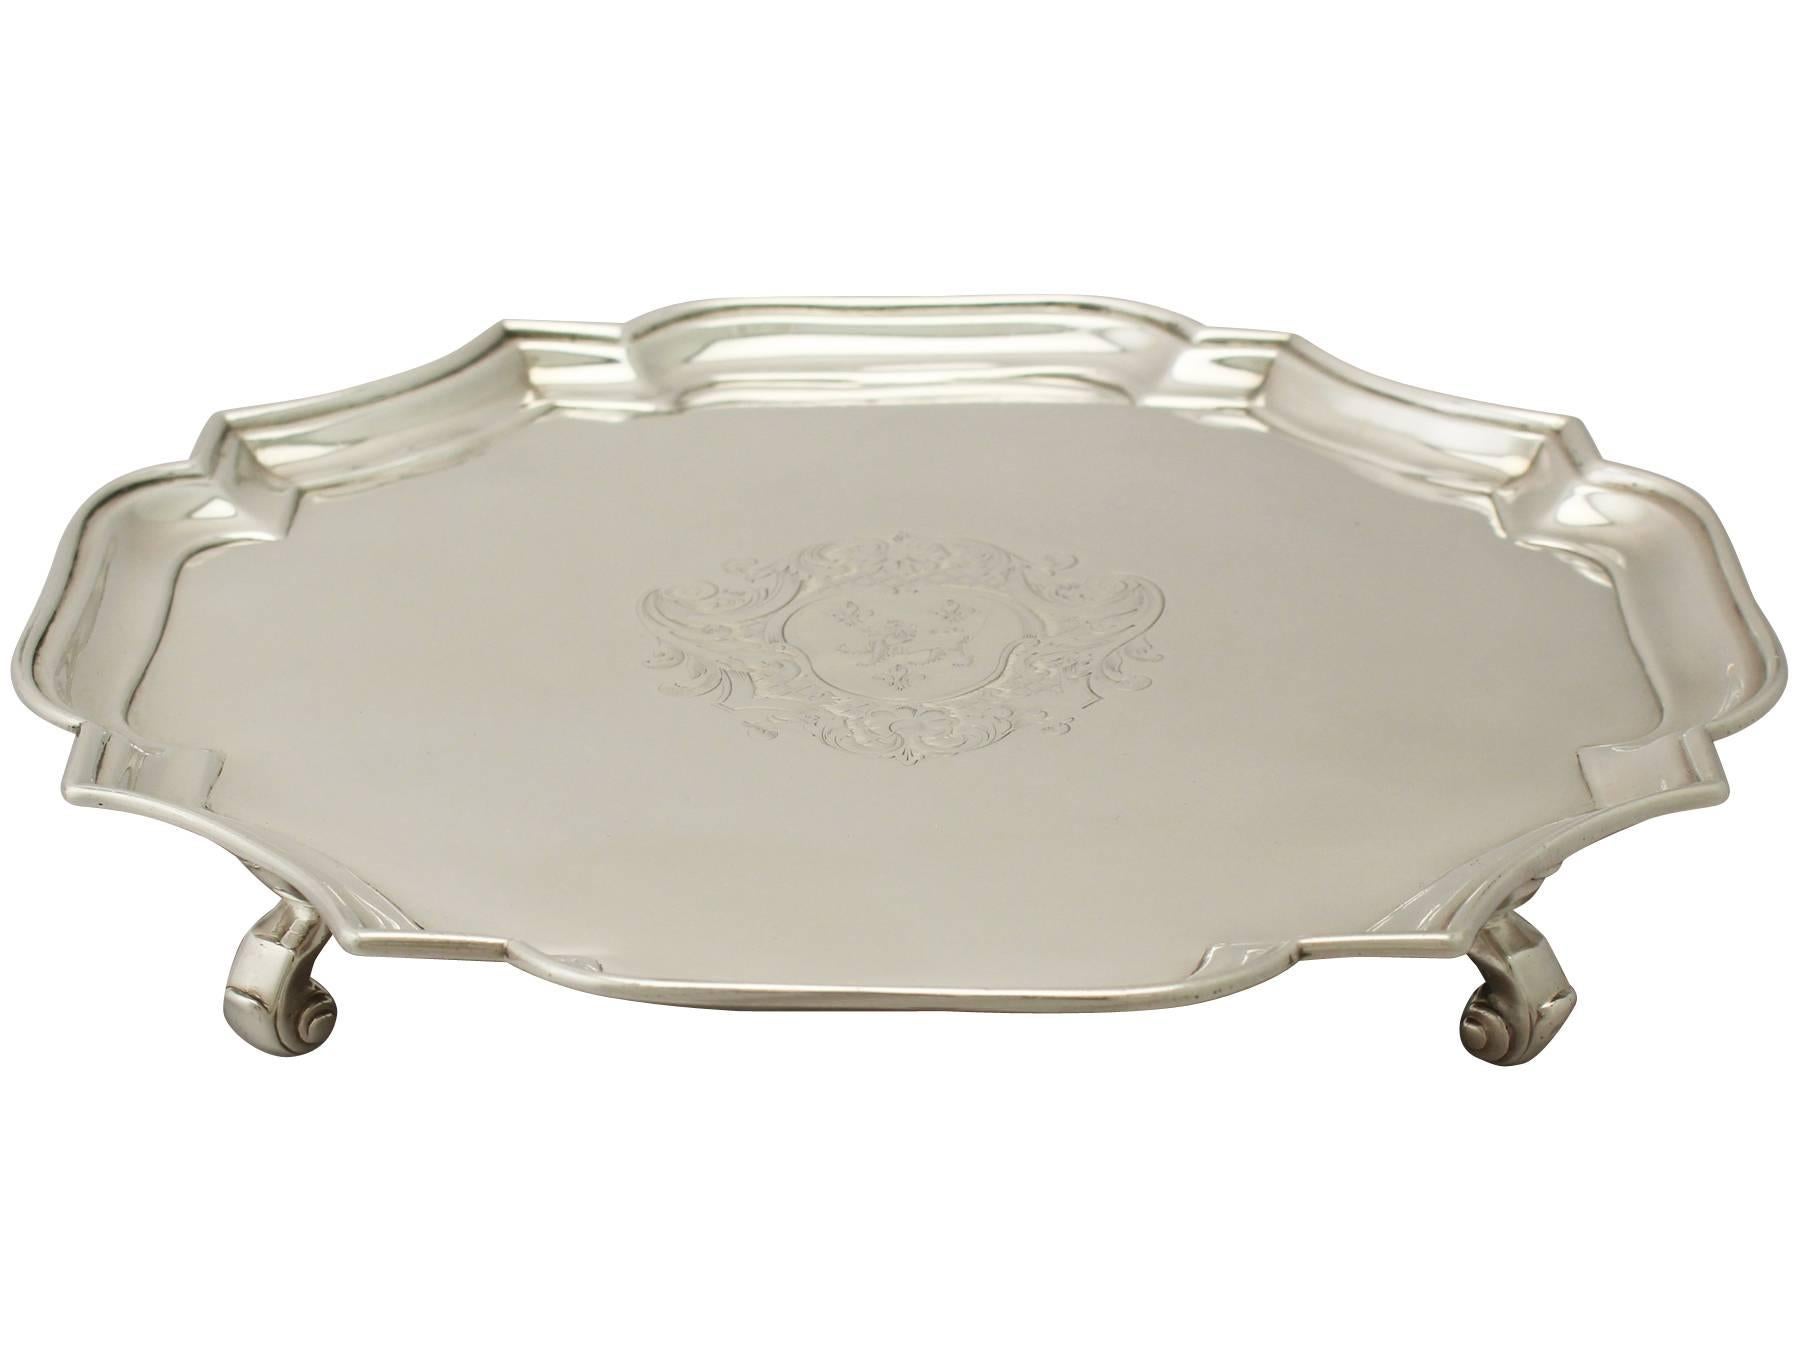 English George II Sterling Silver Salver